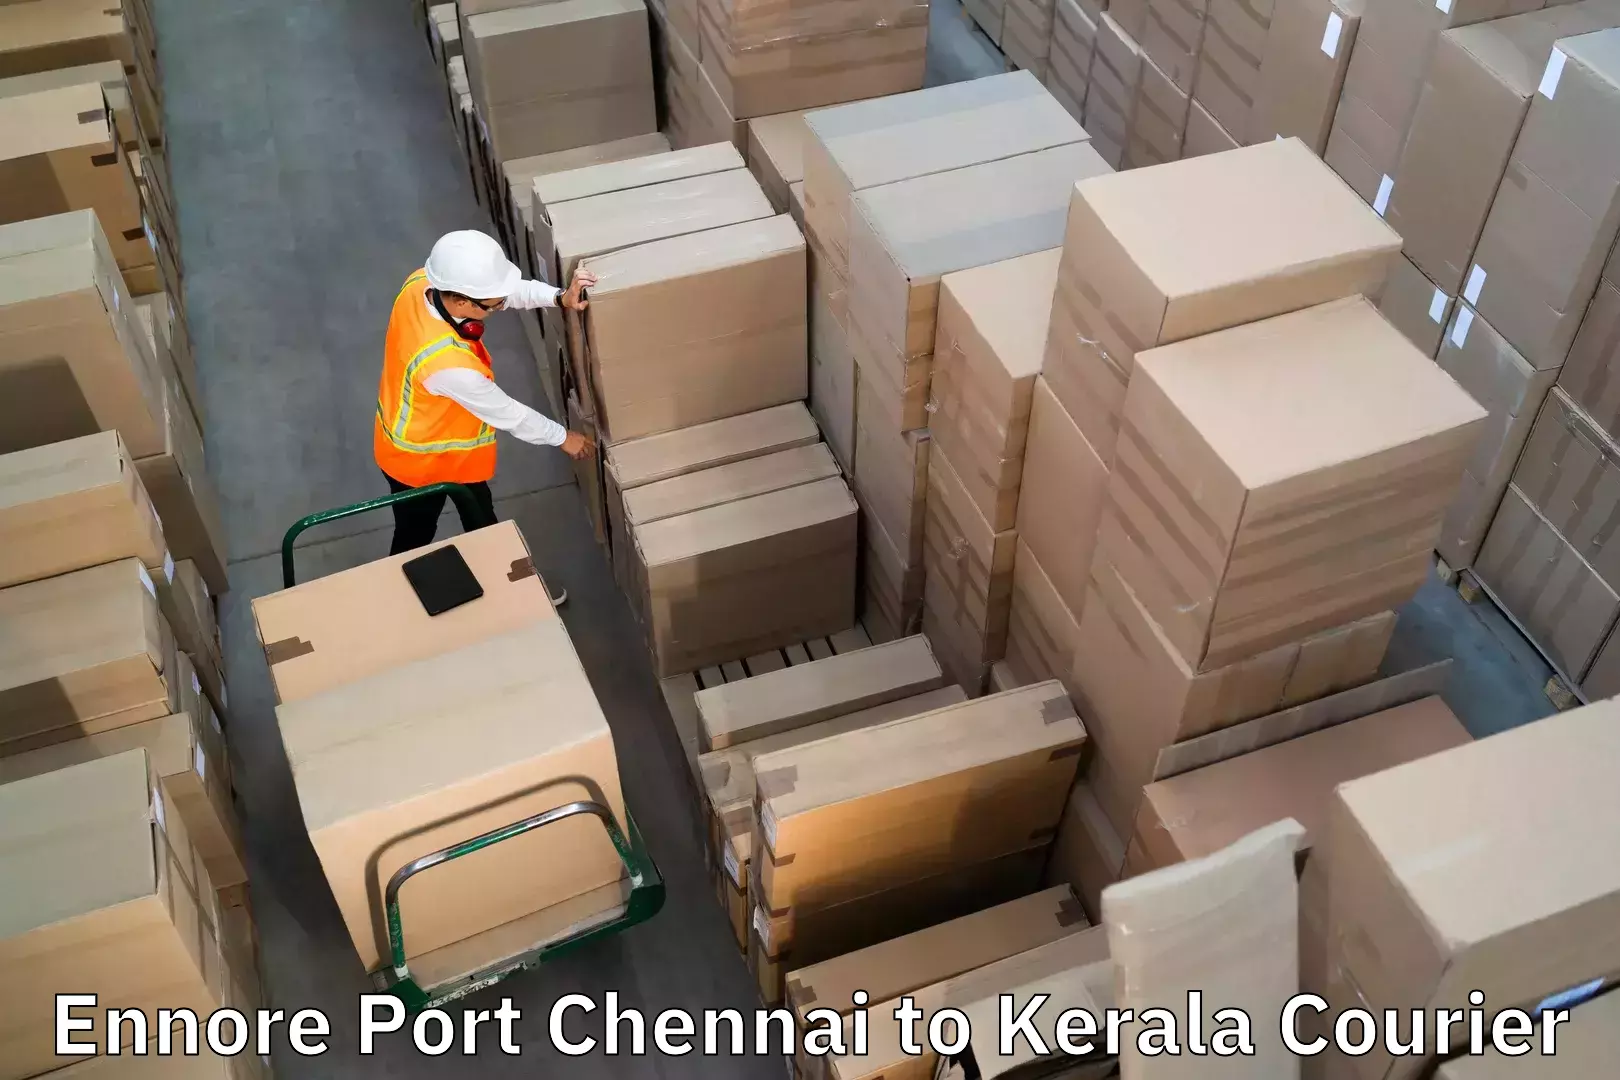 Luggage delivery providers Ennore Port Chennai to Kanhangad